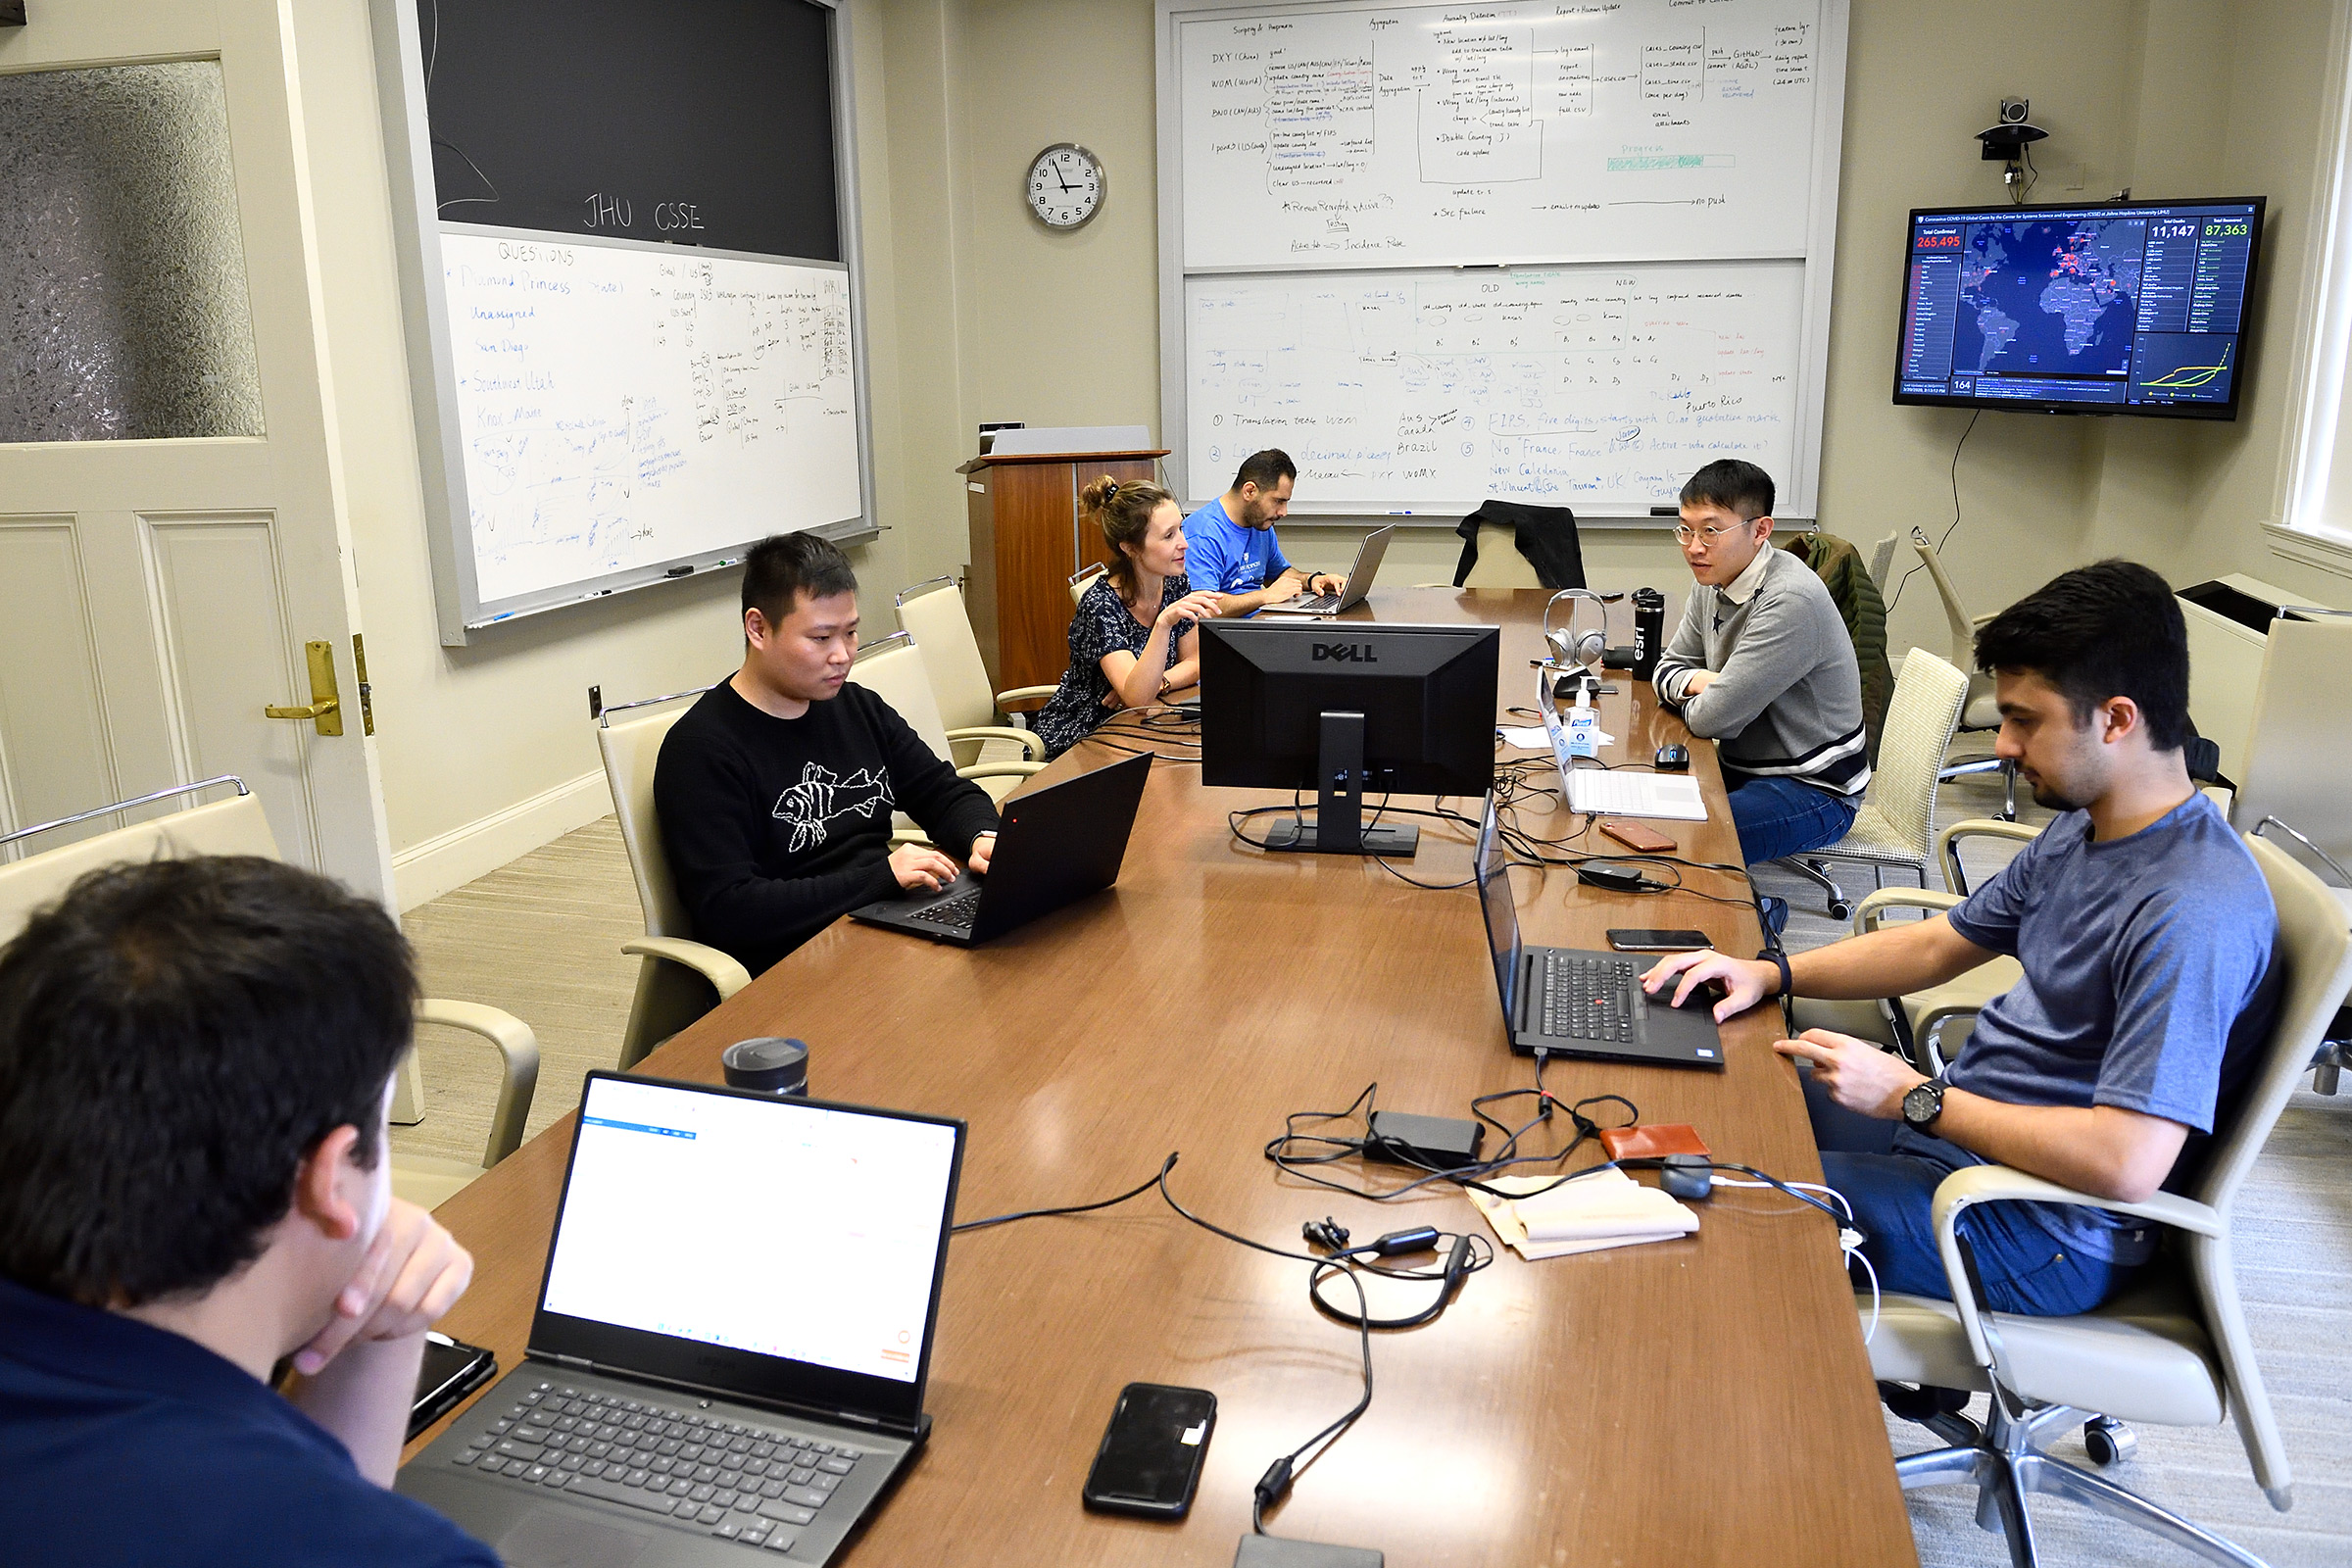 Civil engineering professor Lauren Gardner and her team work to maintain the COVID-19 dashboard, built by Gardner's team at the Center for Systems Science and Engineering (CSSE) at Johns Hopkins University. (Will Kirk—Johns Hopkins University)